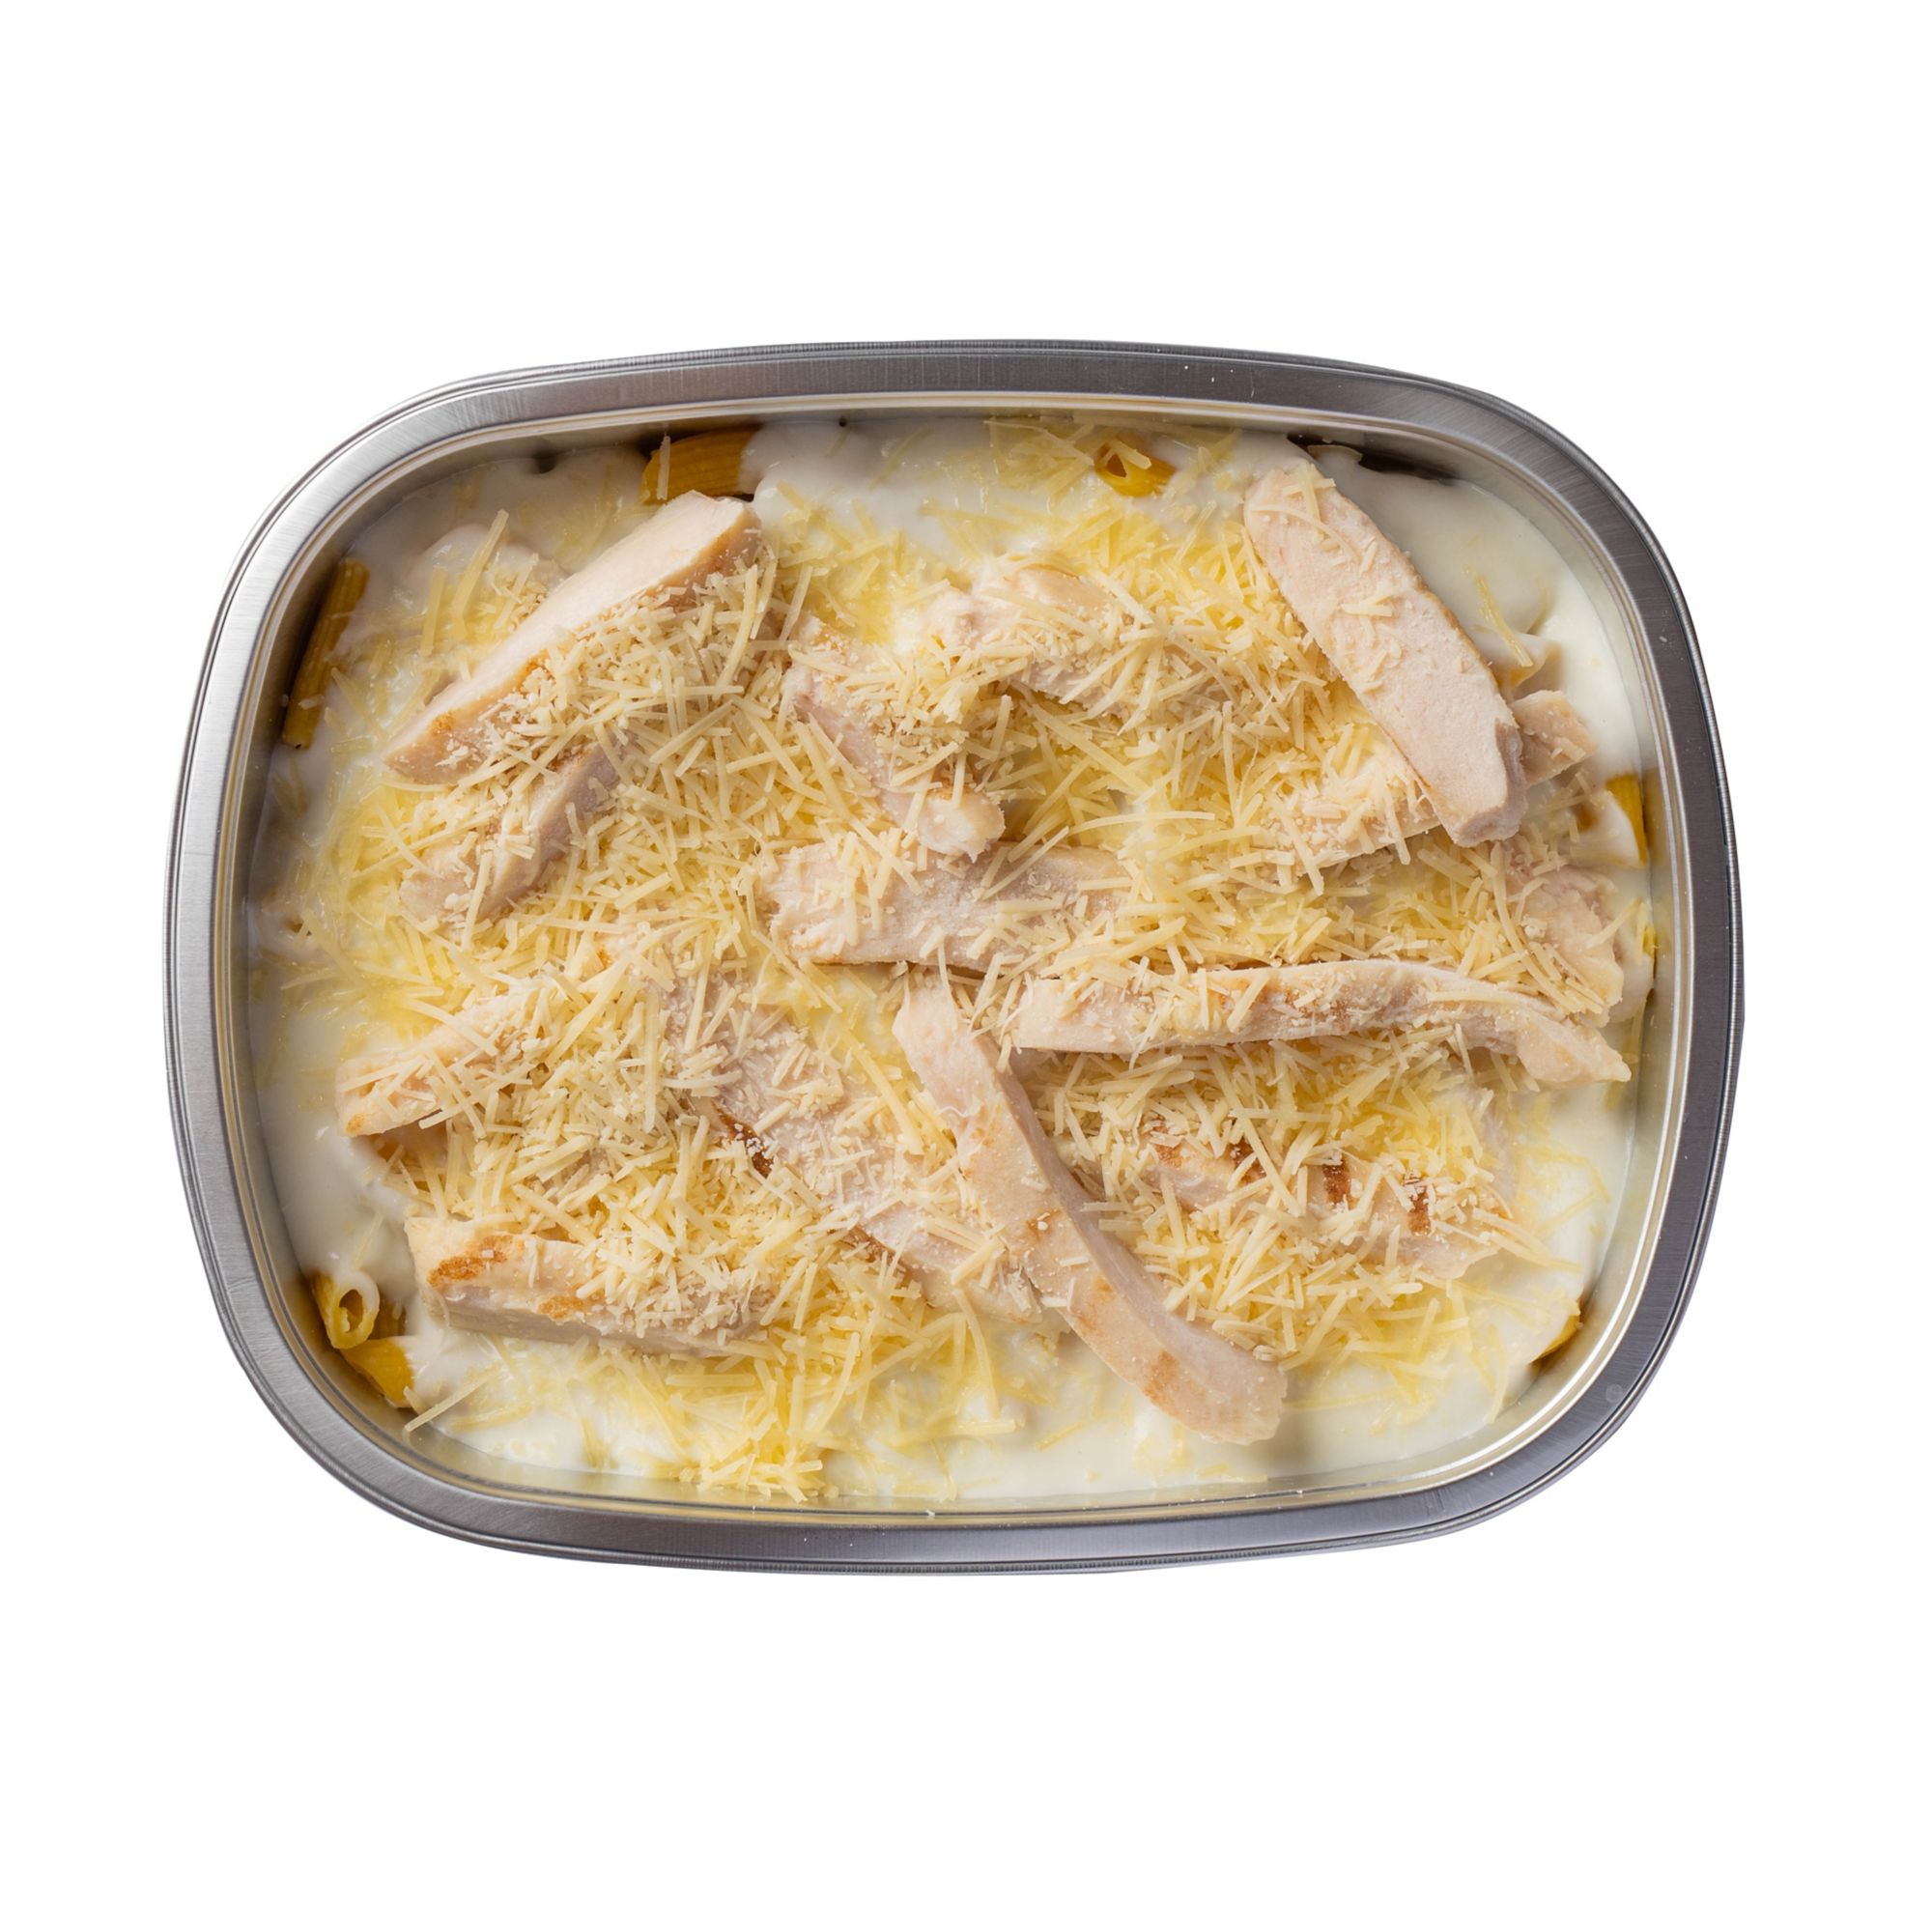 Wellsey Farms Chicken Alfredo and Penne Pasta, 2.7-3.05 lbs.